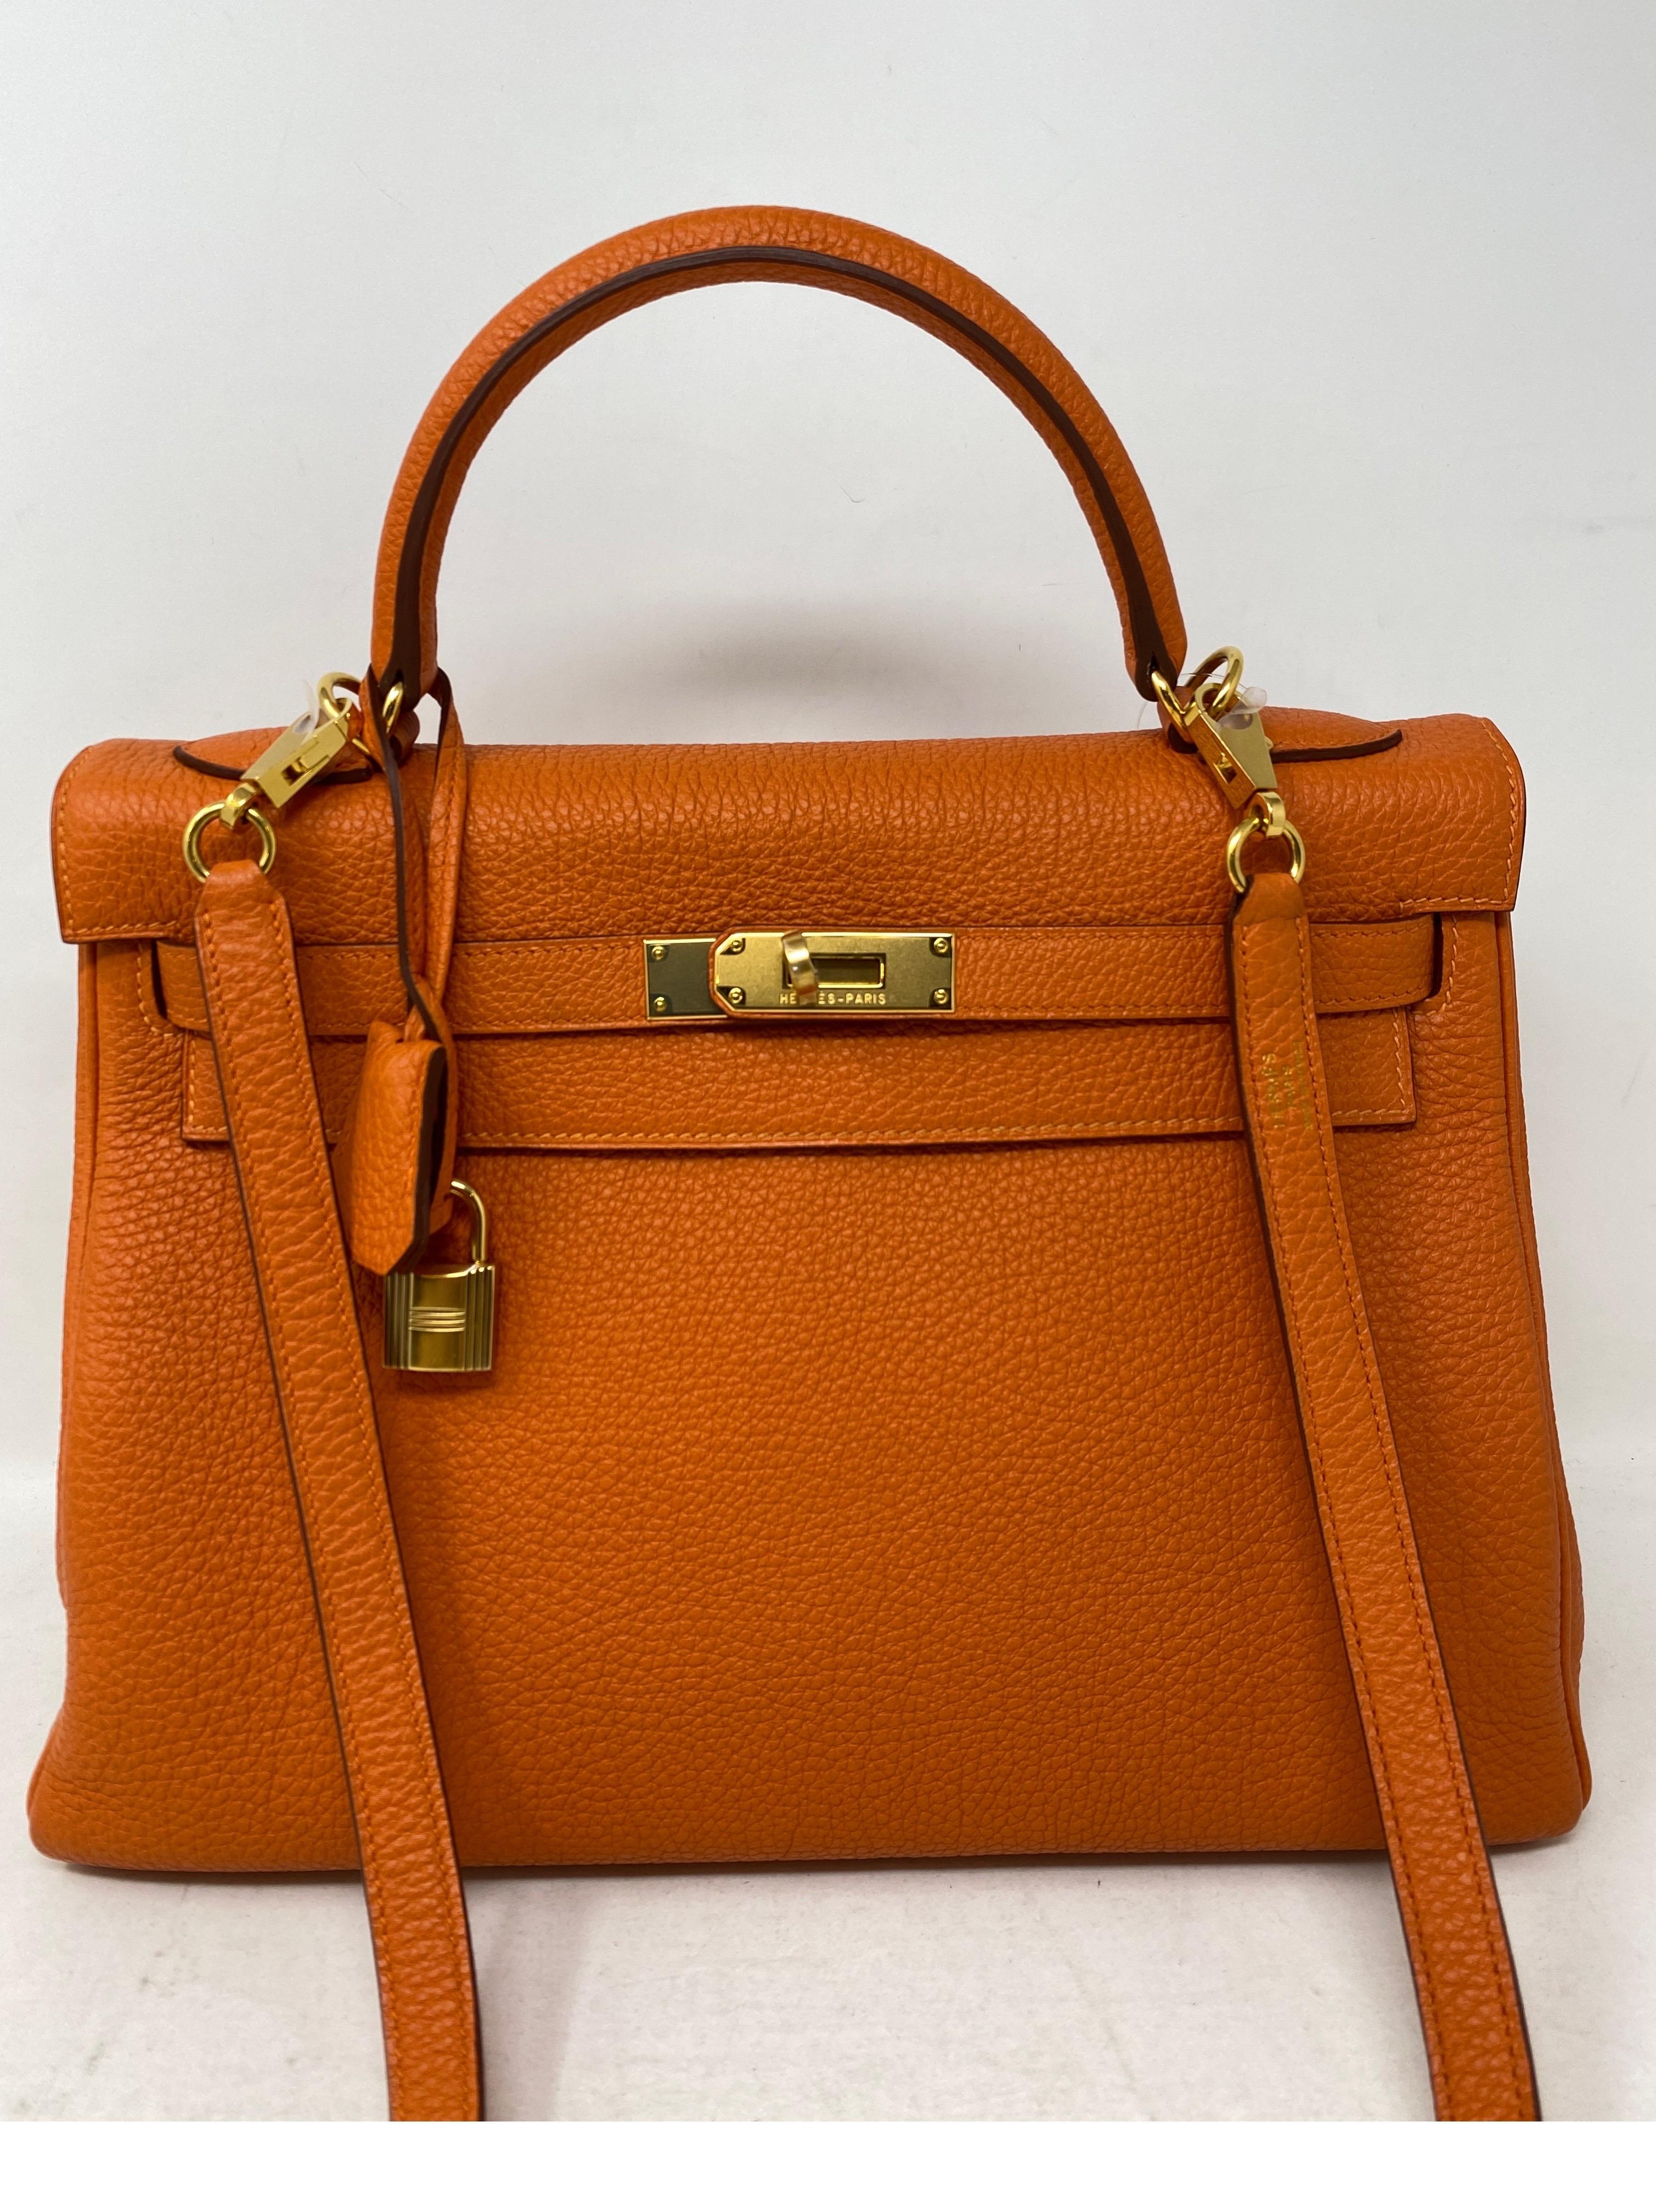 Hermes Orange Kelly 32 Bag. Excellent like new condition. Gold hardware. Hard to find size Kelly. Classic orange color. Includes clochette, lock, keys, and dust cover. Guaranteed authentic. 